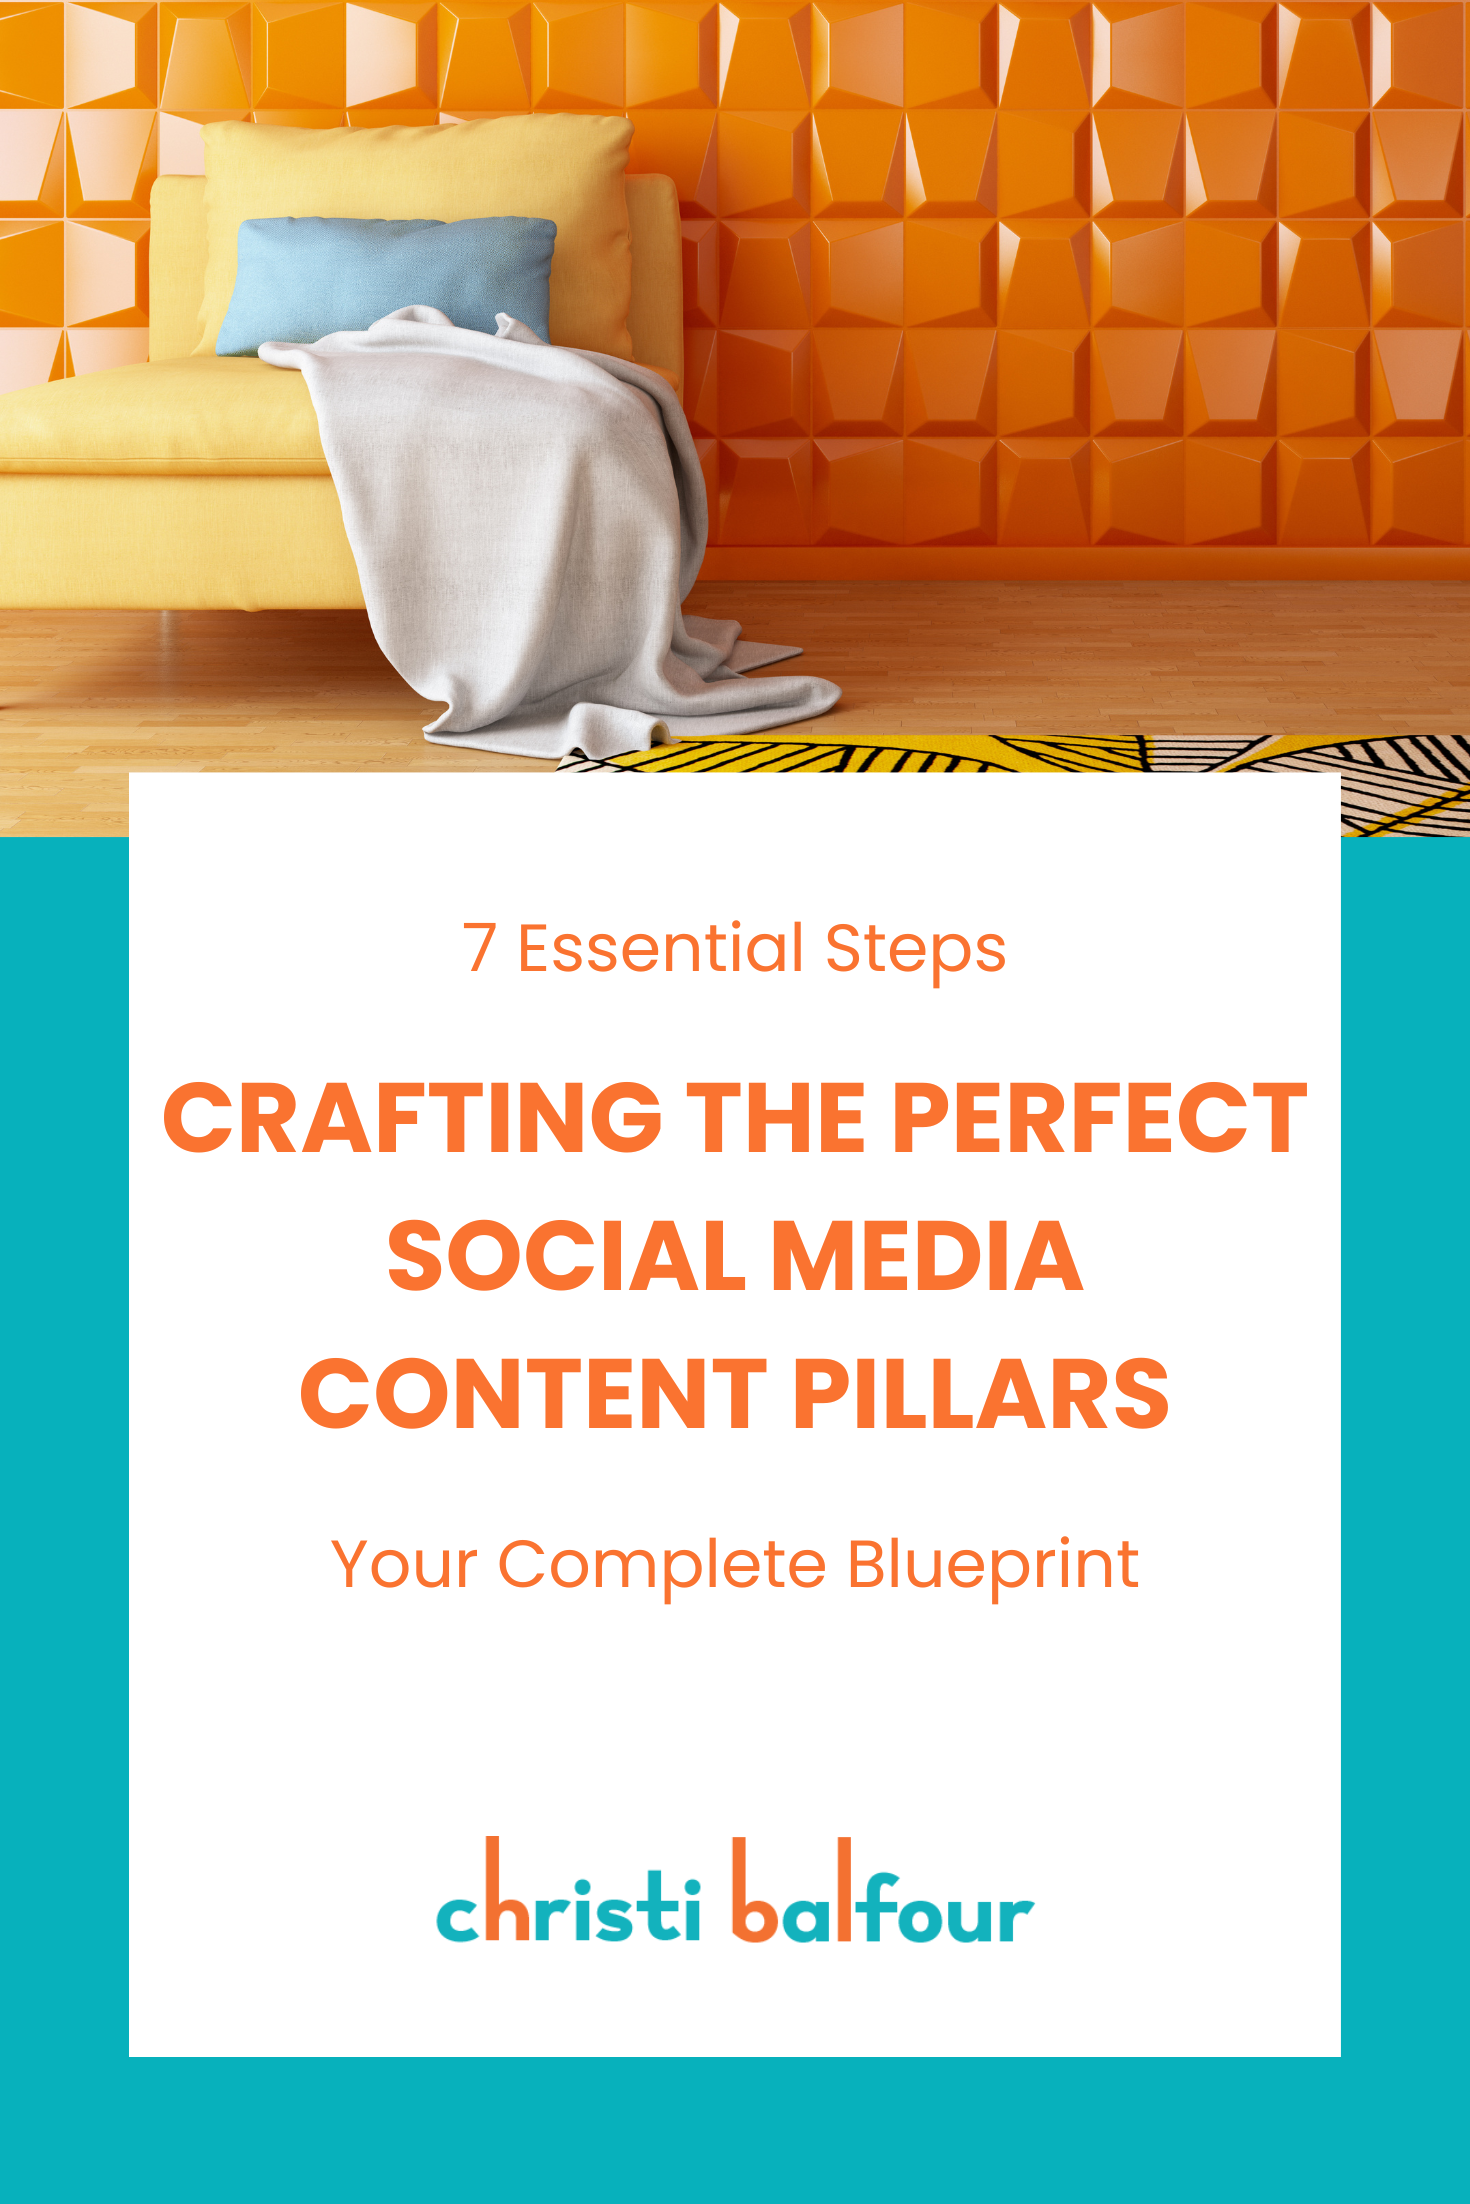 7 Essential Steps - Crafting the Perfect Social Media Content Pillars - Your Complete Blueprint